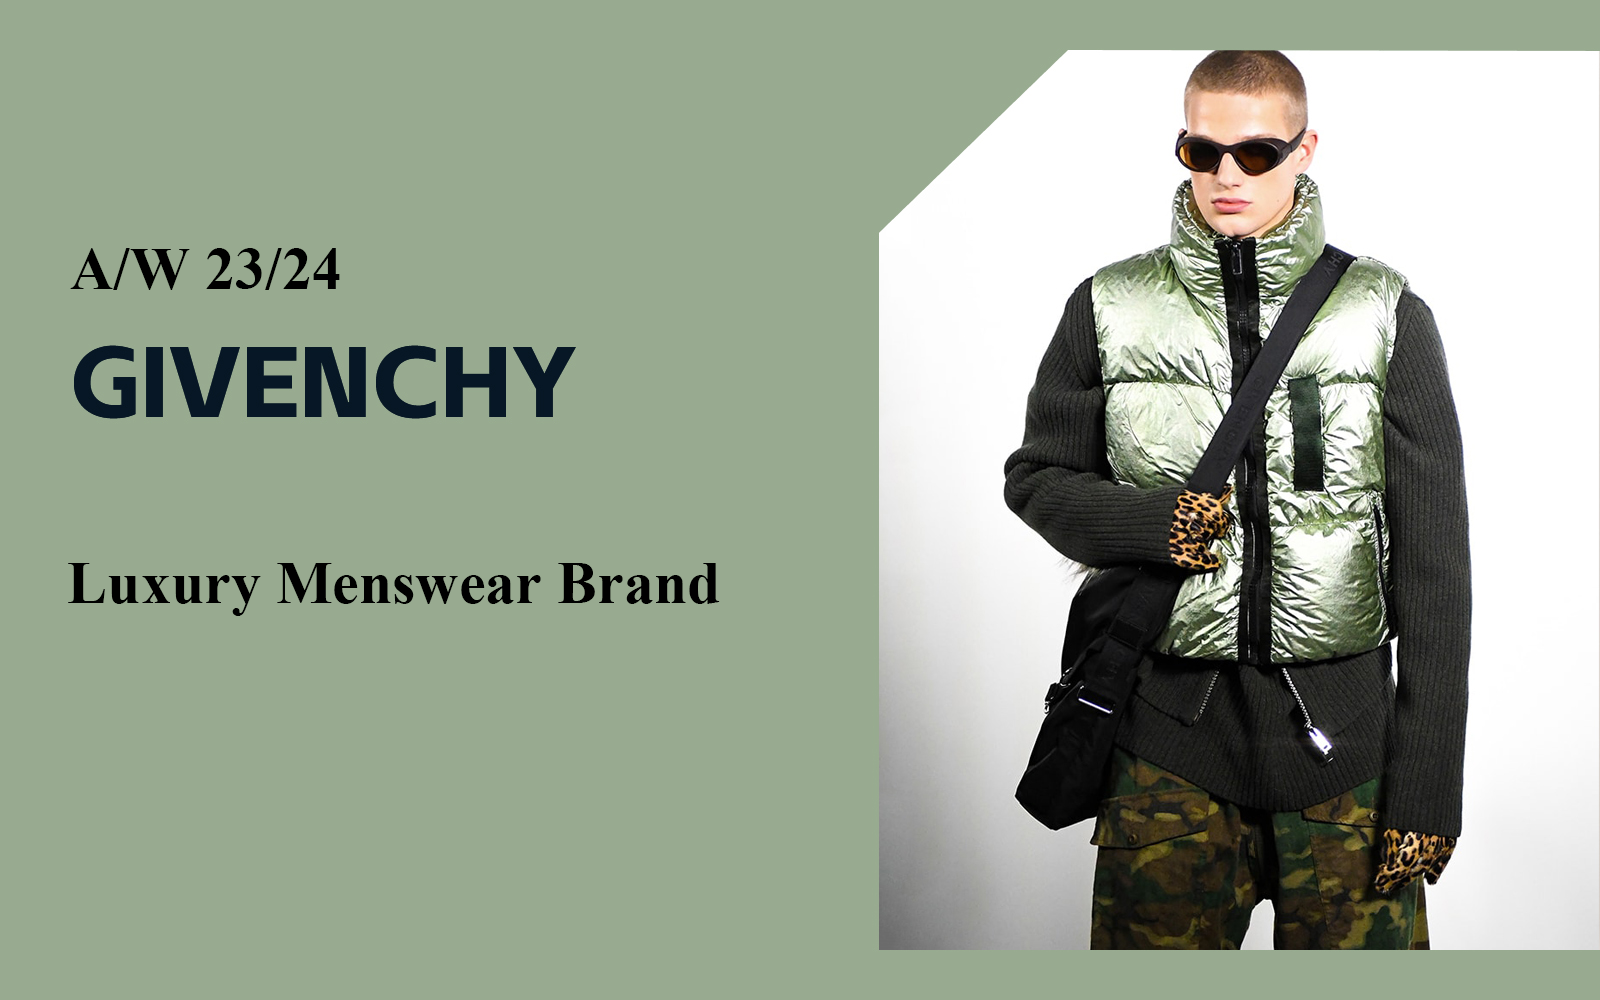 The Analysis of Givenchy The Luxury Menswear Brand